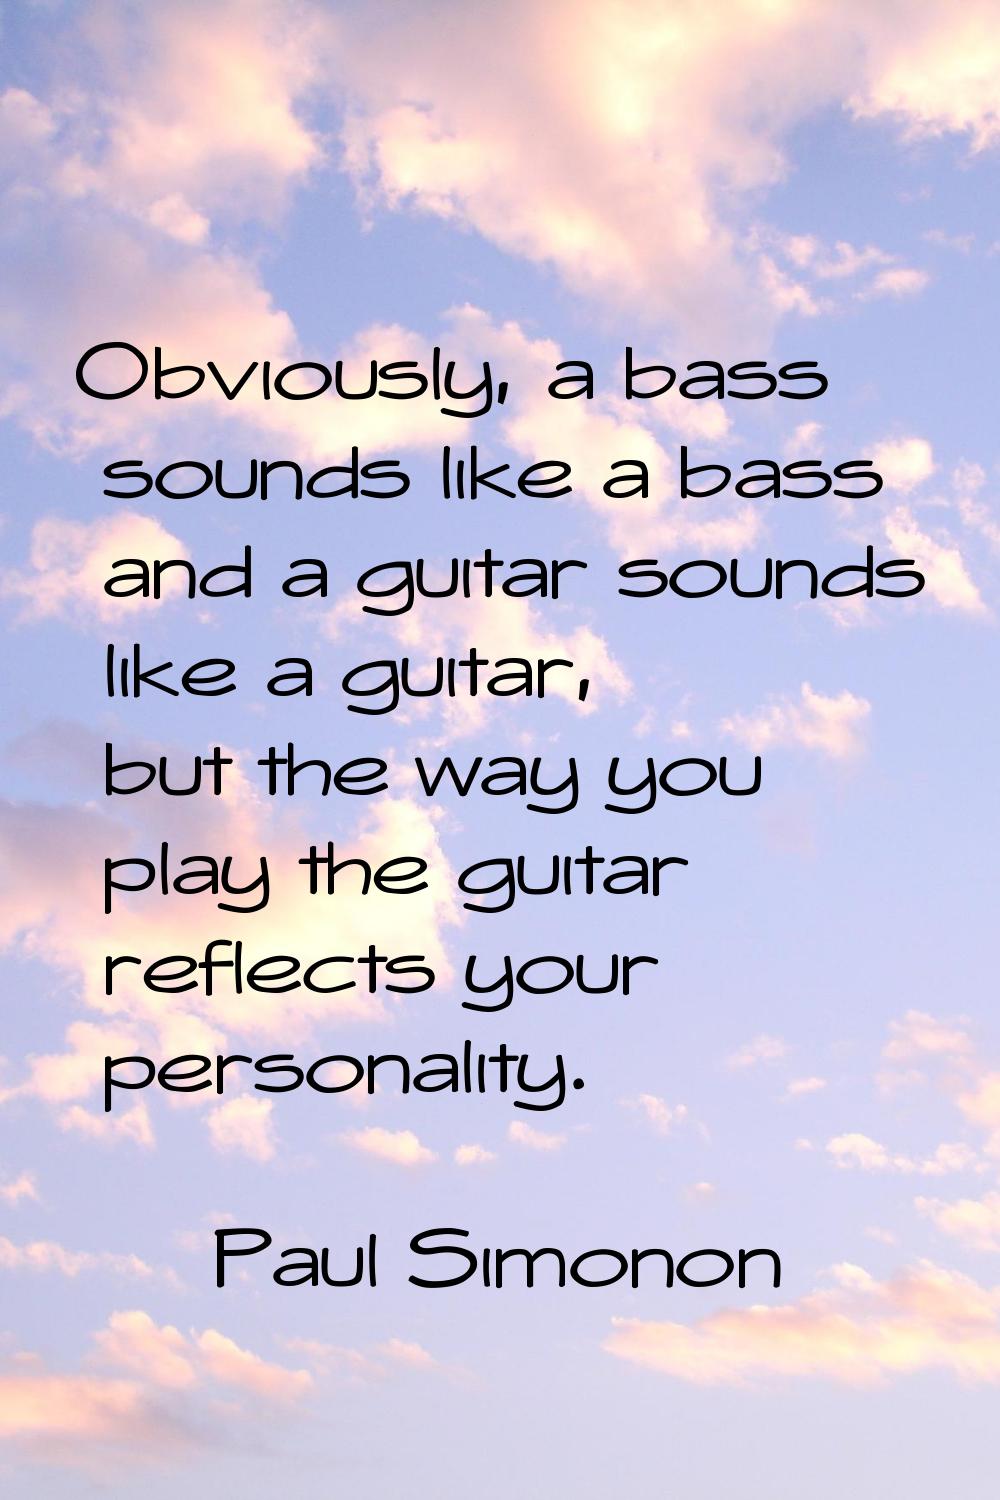 Obviously, a bass sounds like a bass and a guitar sounds like a guitar, but the way you play the gu